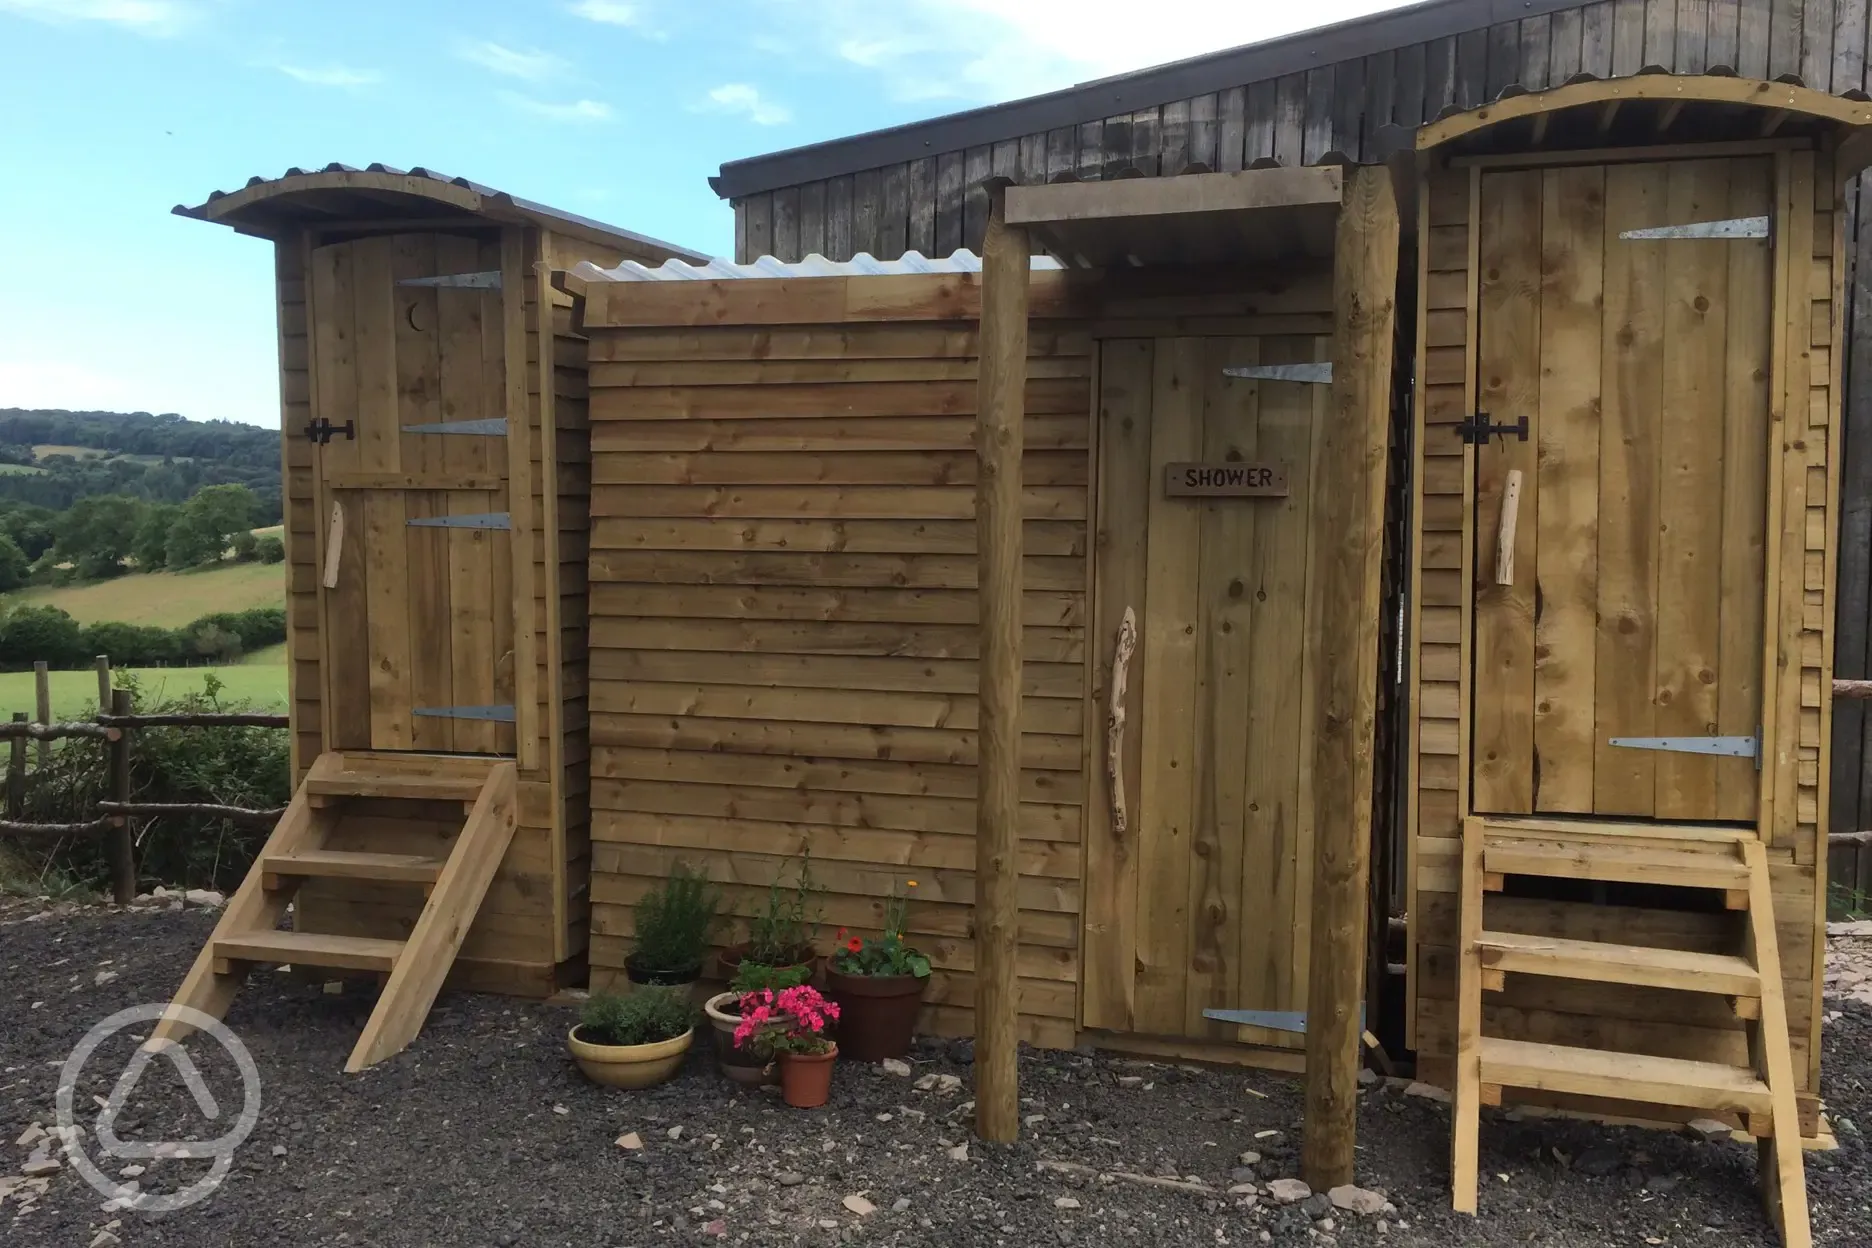 Composting toilets and Shower